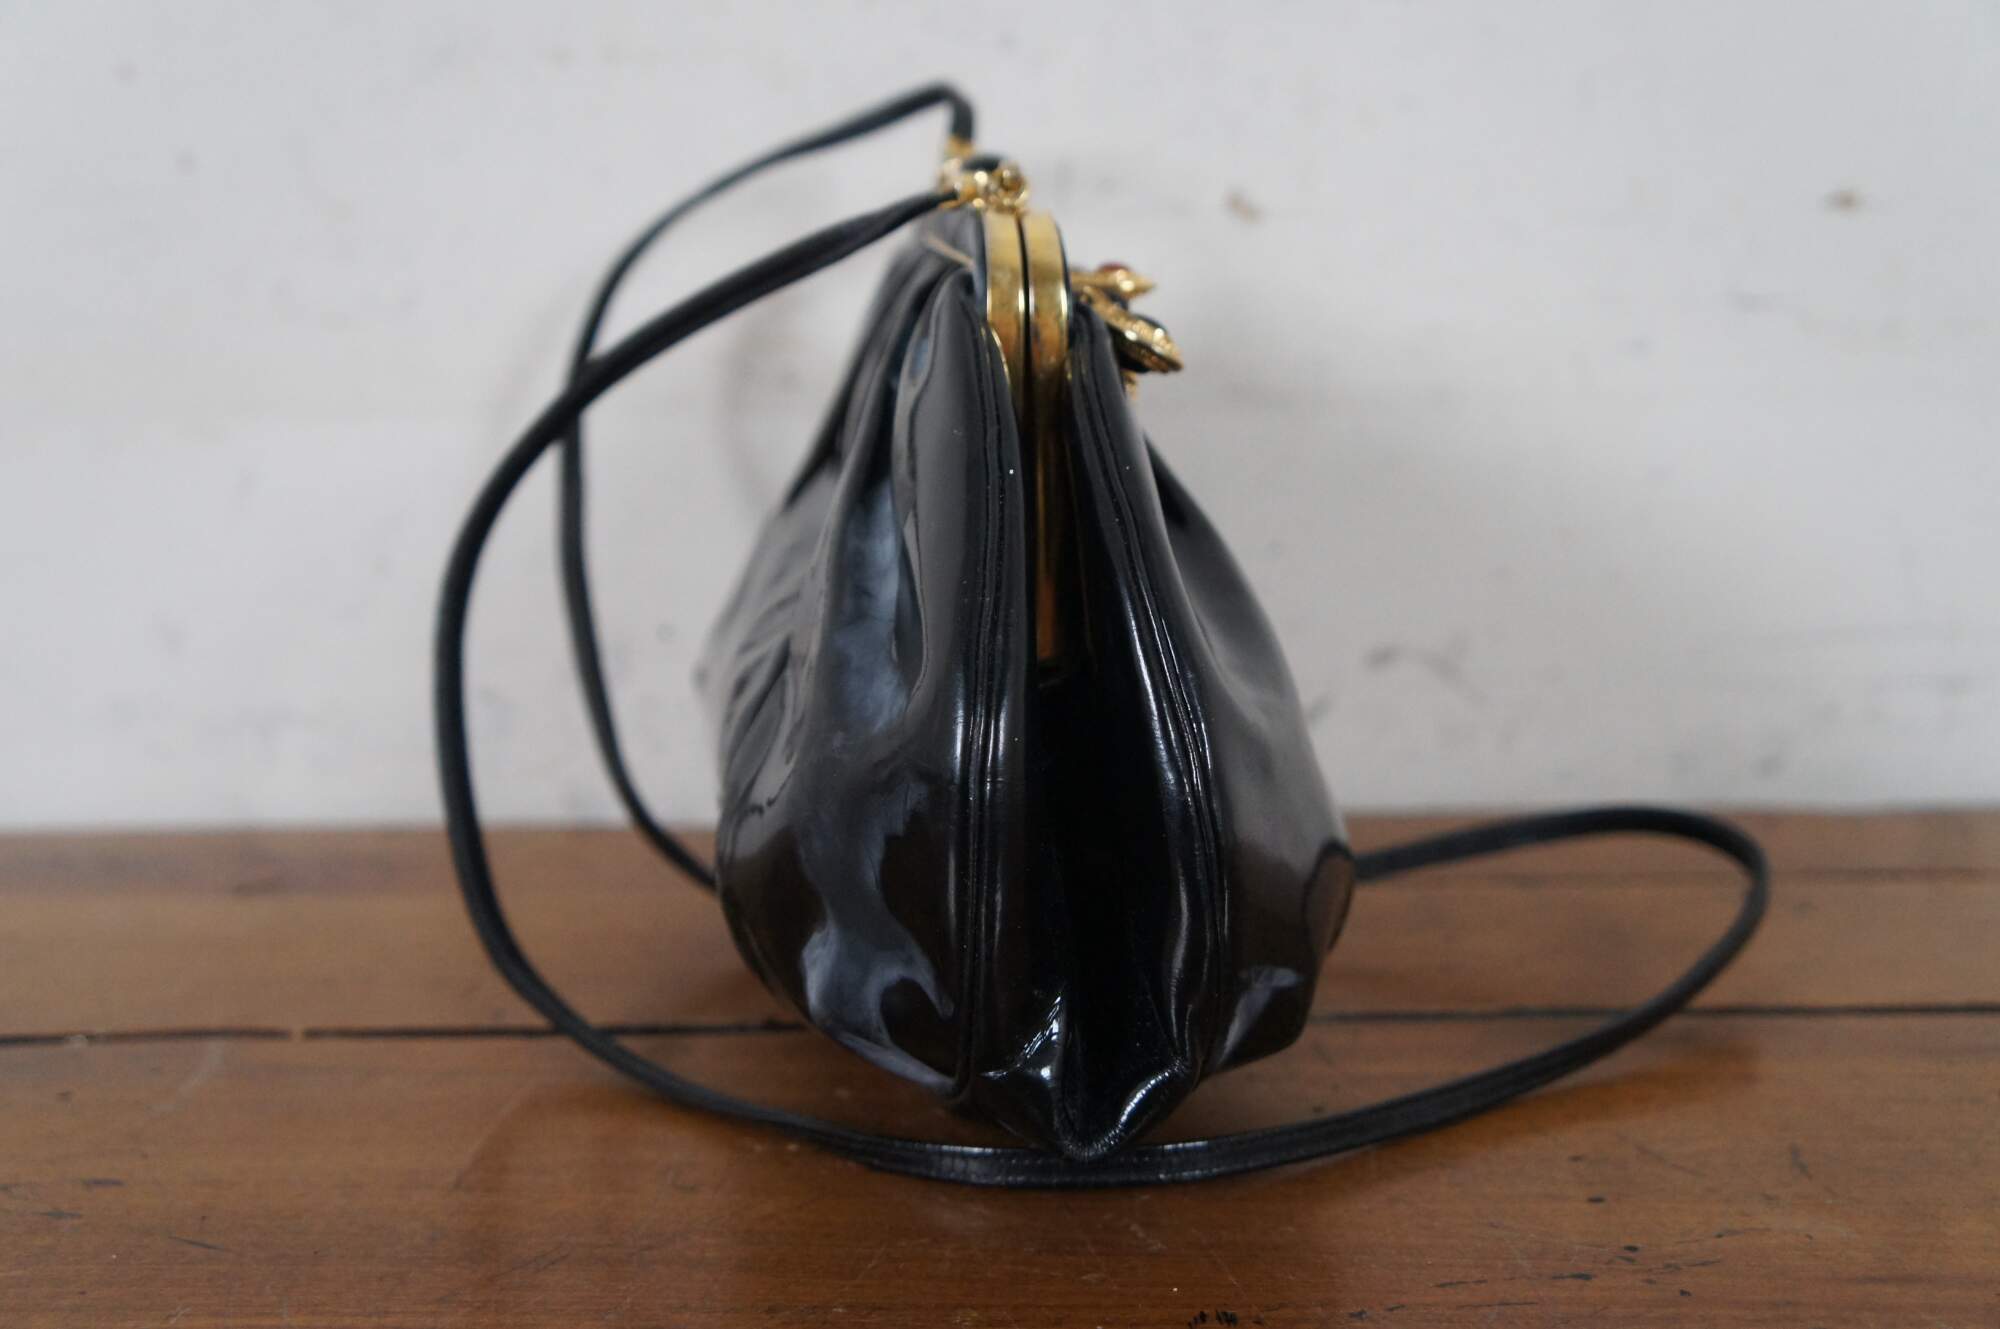 Vintage Judith Leiber Italian Patent Leather Bag Mirror Comb Coin Purse